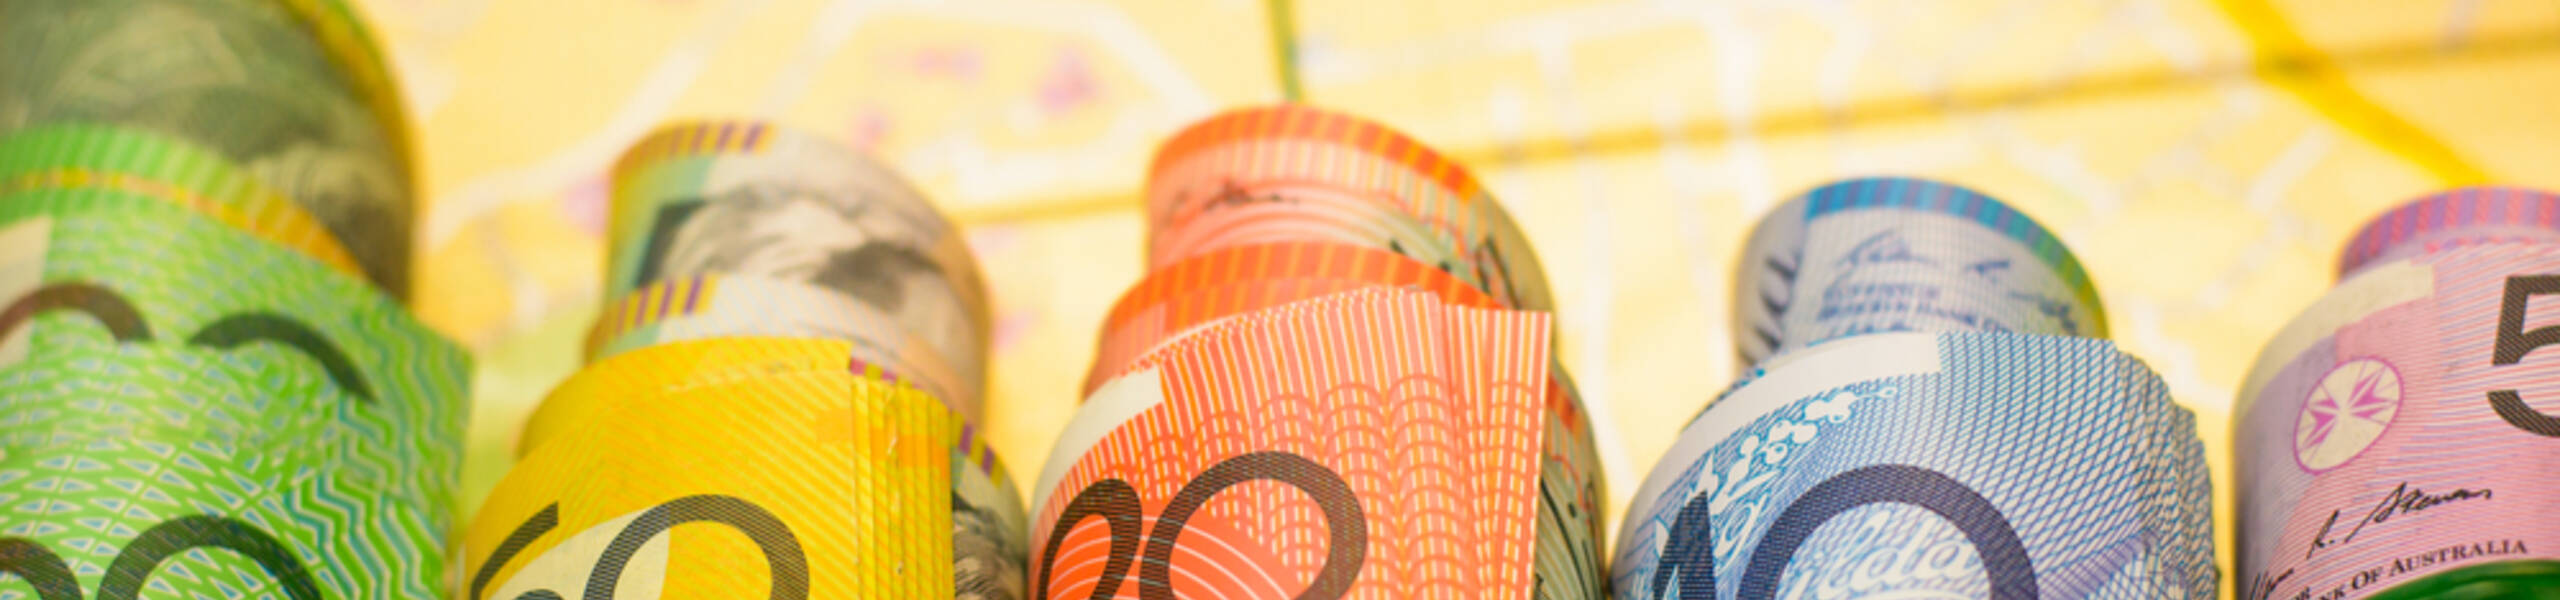 AUD/USD: the aussie gains back its strength